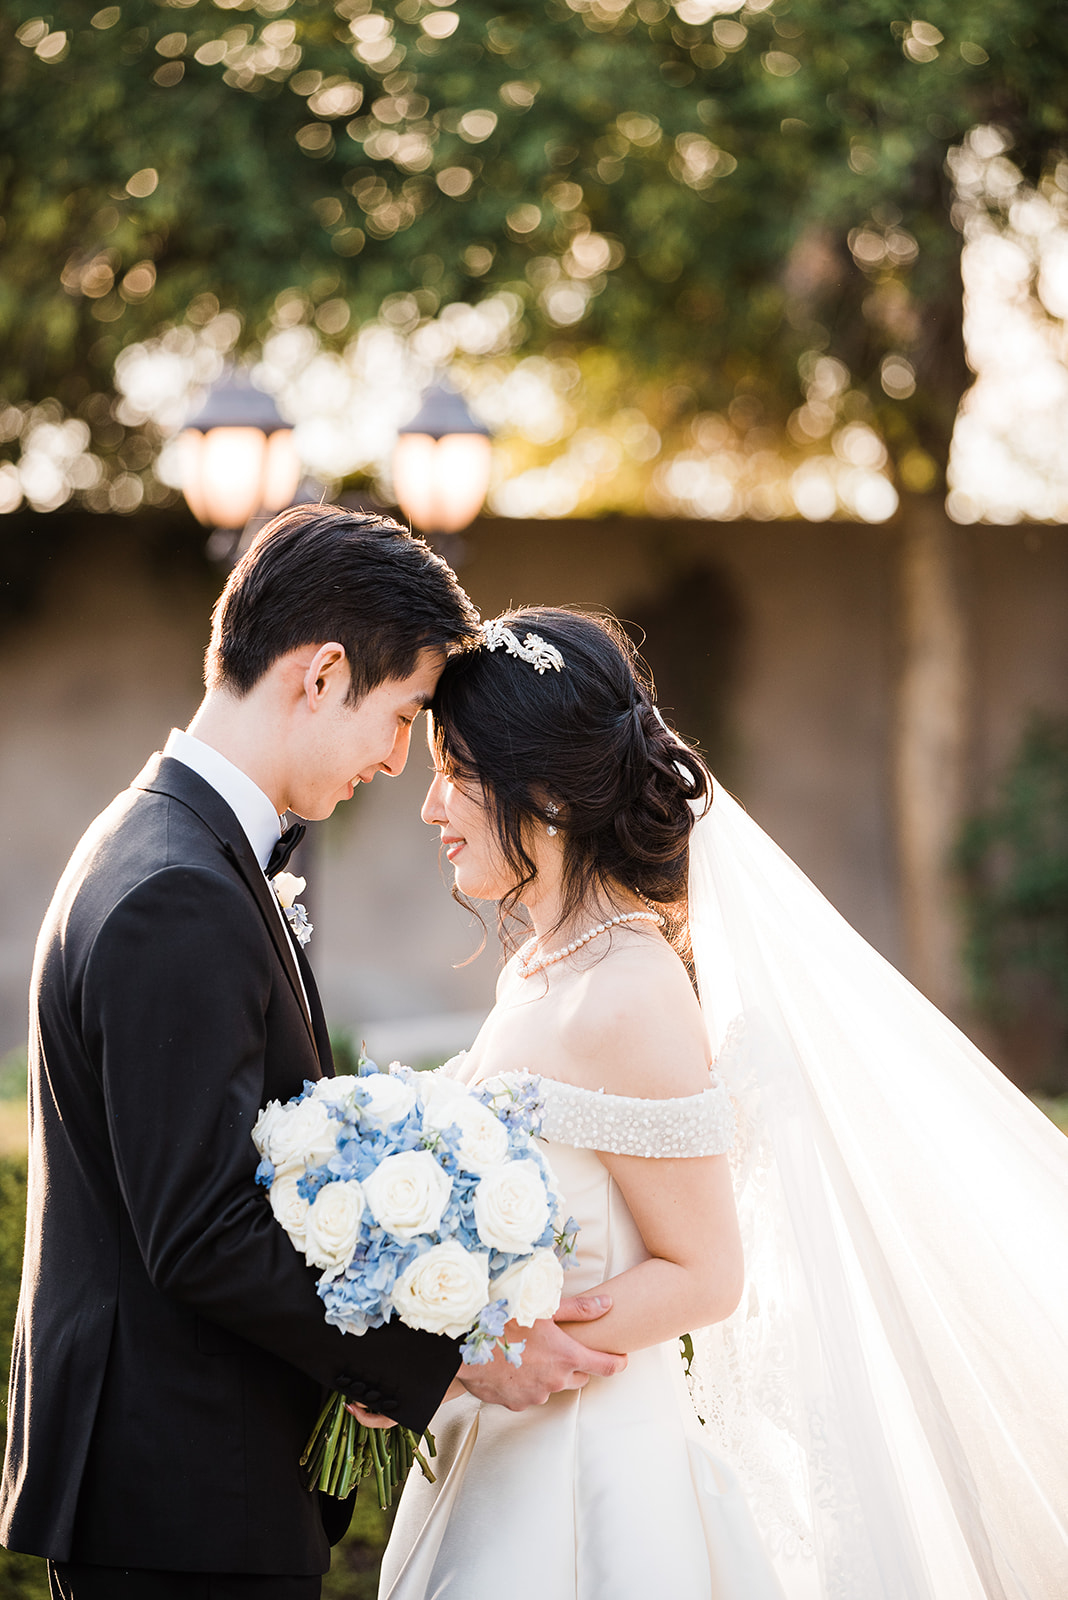 Newlyweds touch foreheads while standing in a garden at sunset